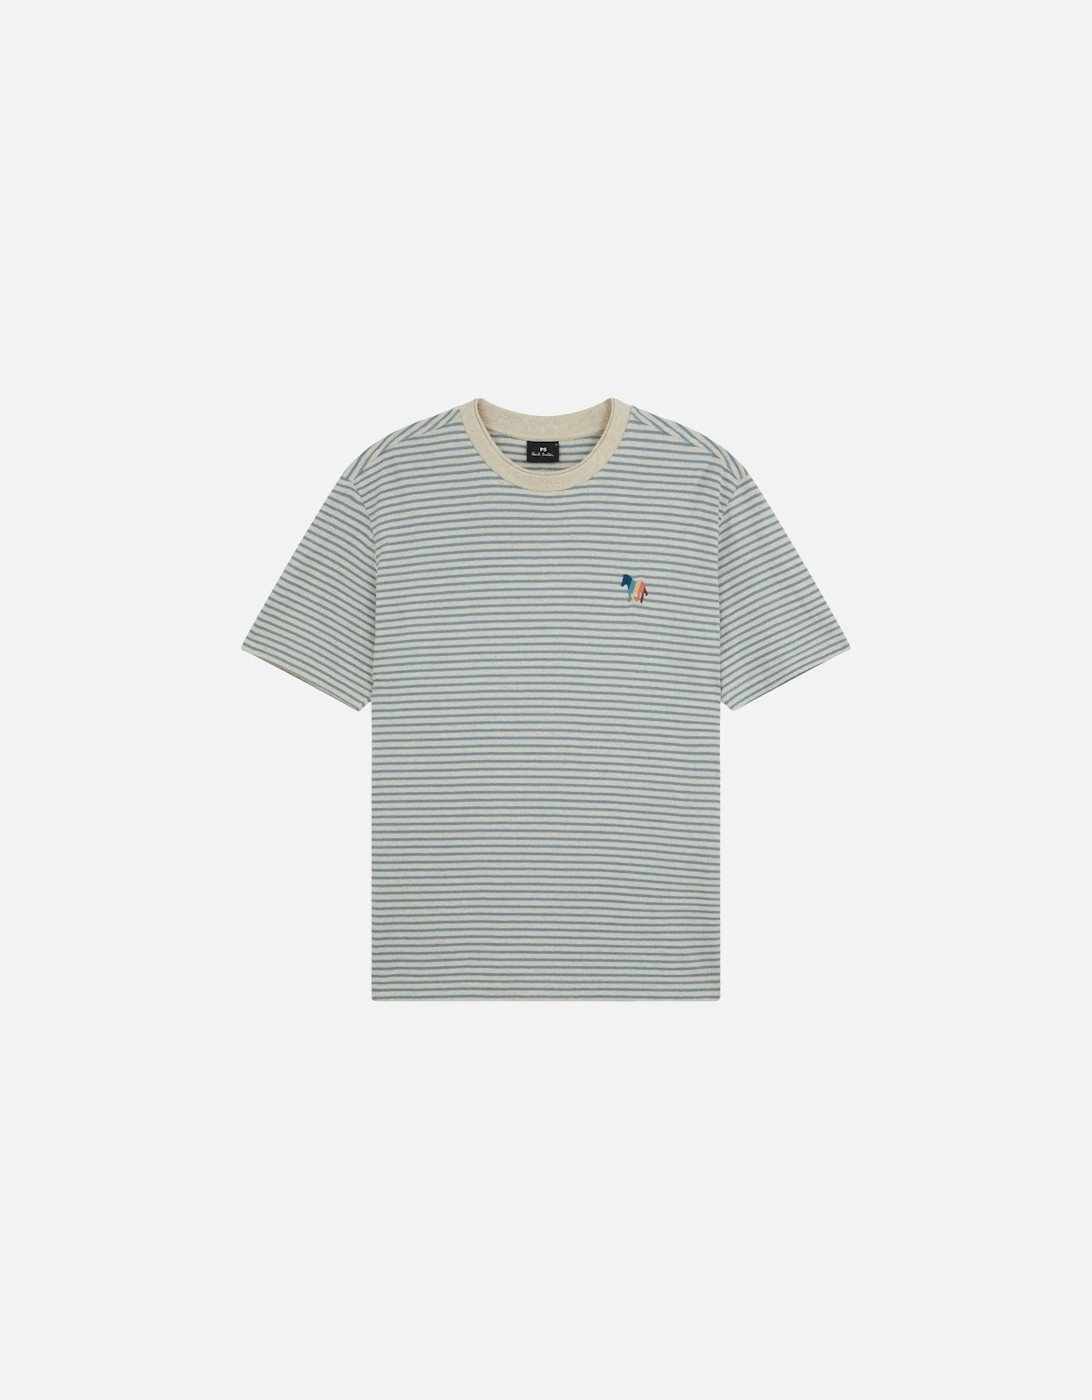 PS Broad Zebra T-Shirt 02 Off White, 2 of 1